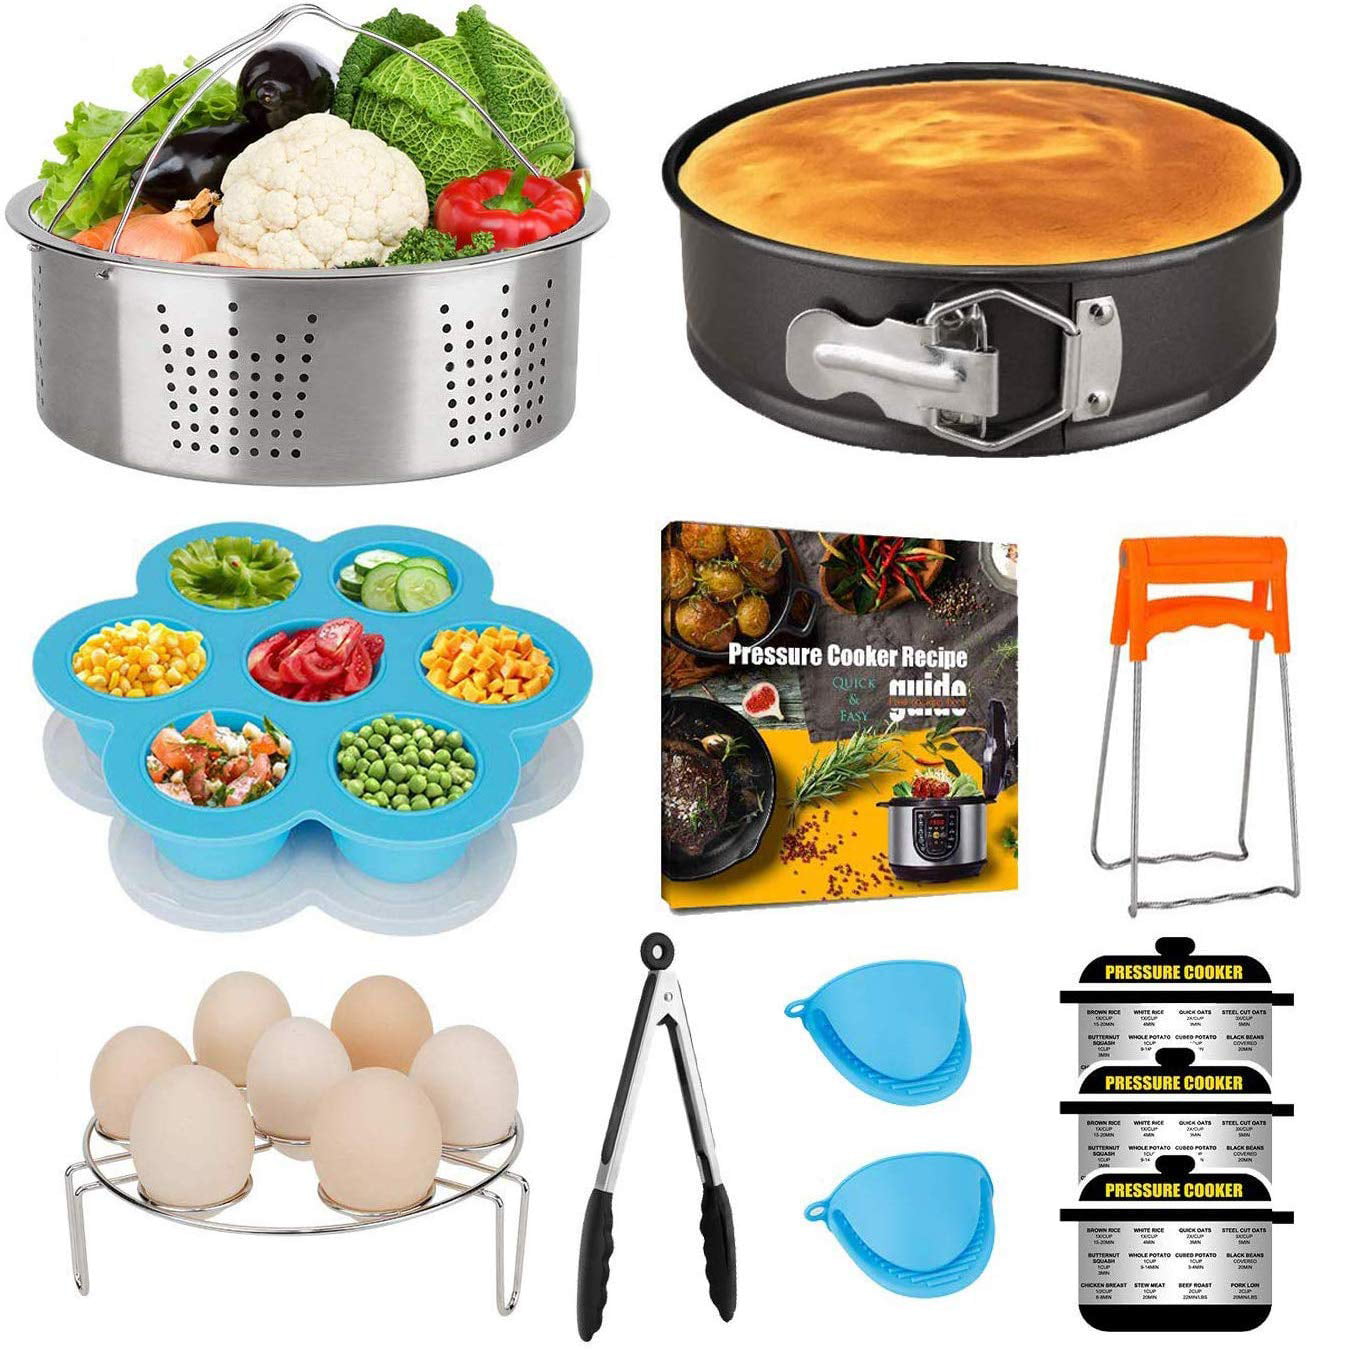 Stainless Steel Cooking Set Steamer Rack Silicone Egg Bites Mold for Children